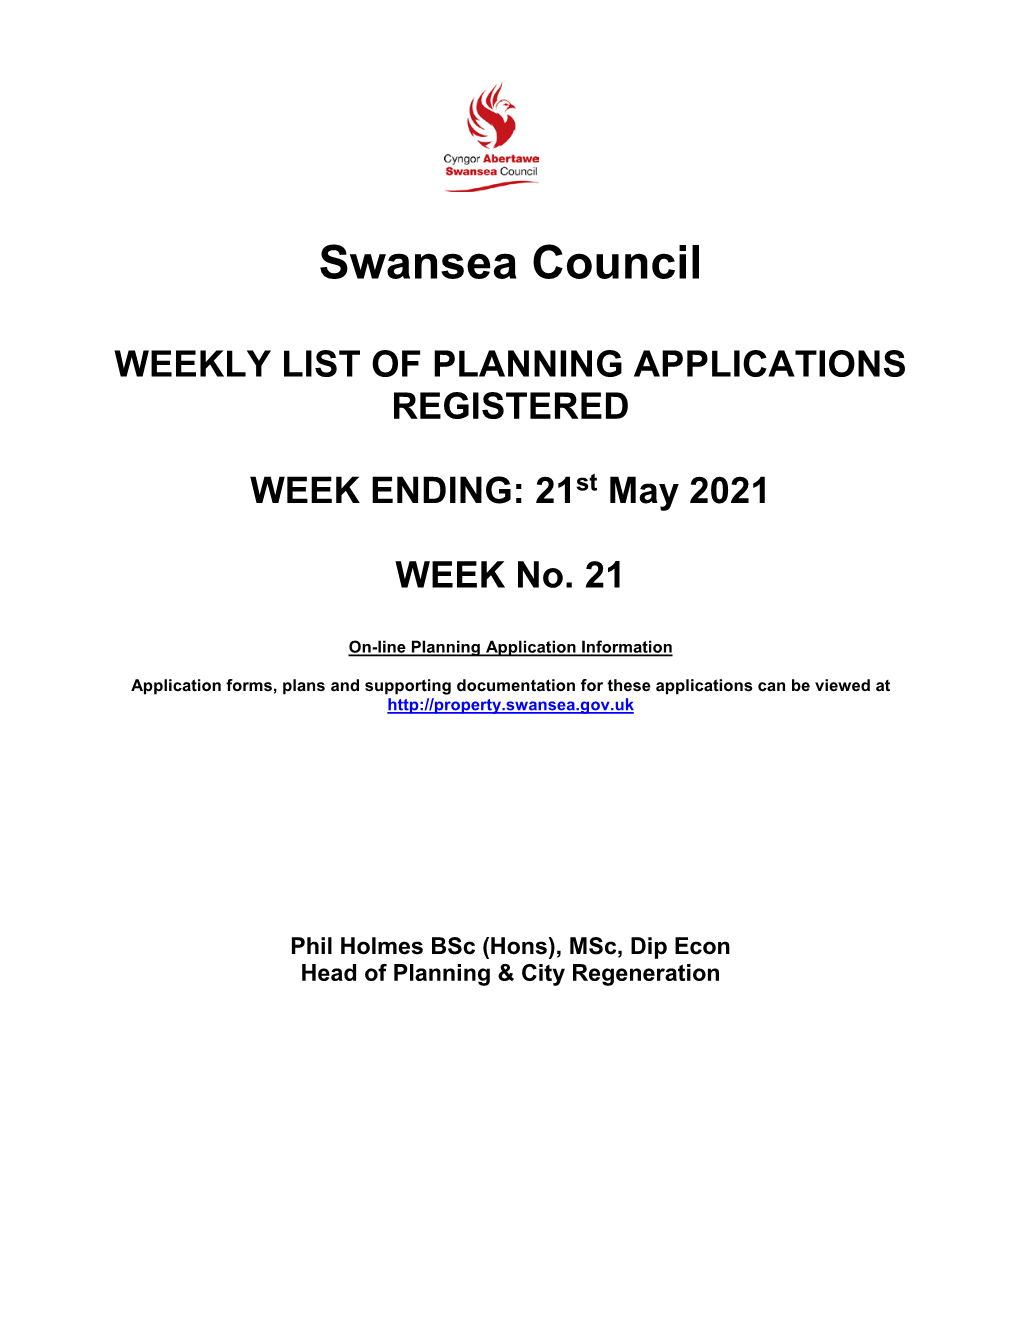 Swansea Council WEEKLY LIST of PLANNING APPLICATIONS